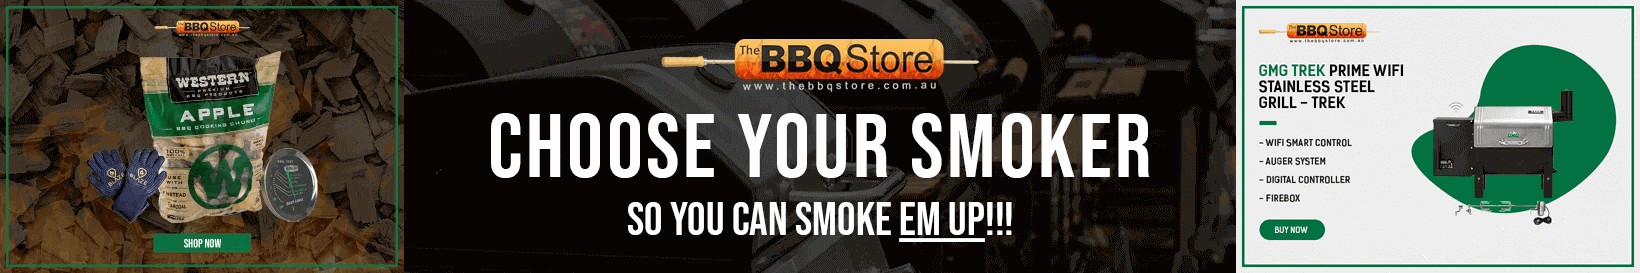 buy green mountains grills smoker for sale at the bbq store sydney